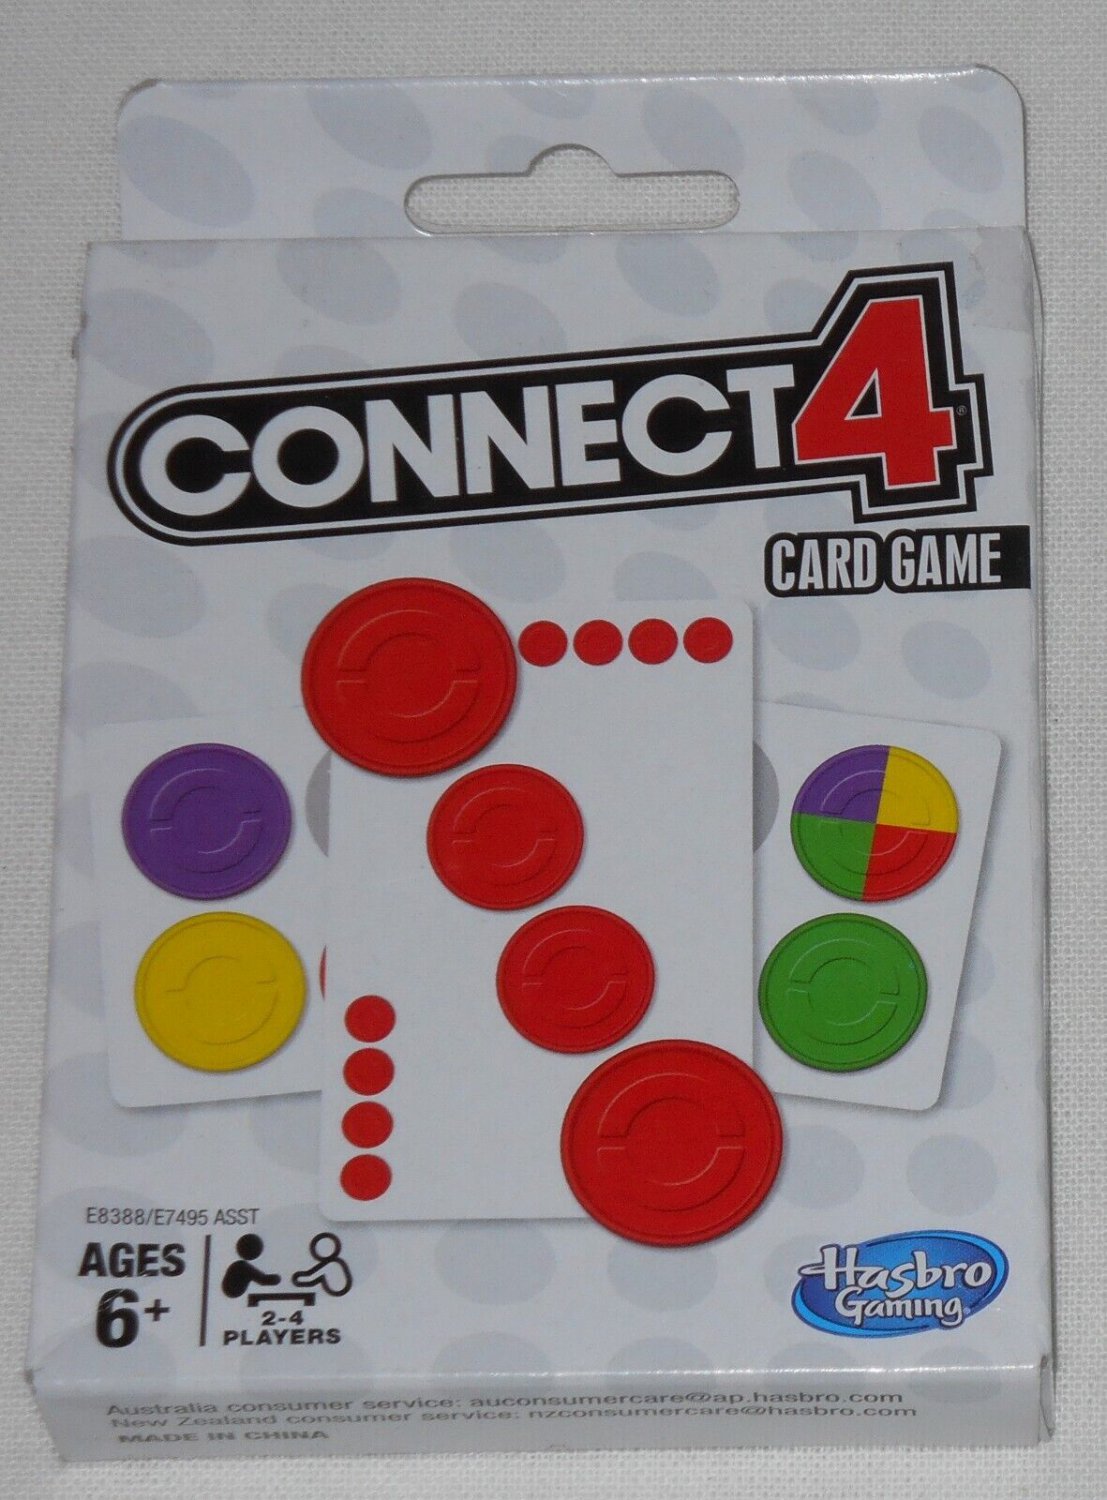 Hasbro Connect 4 Card Game 2 to 4 Players Fun Strategy Game Age 6+ NEW!